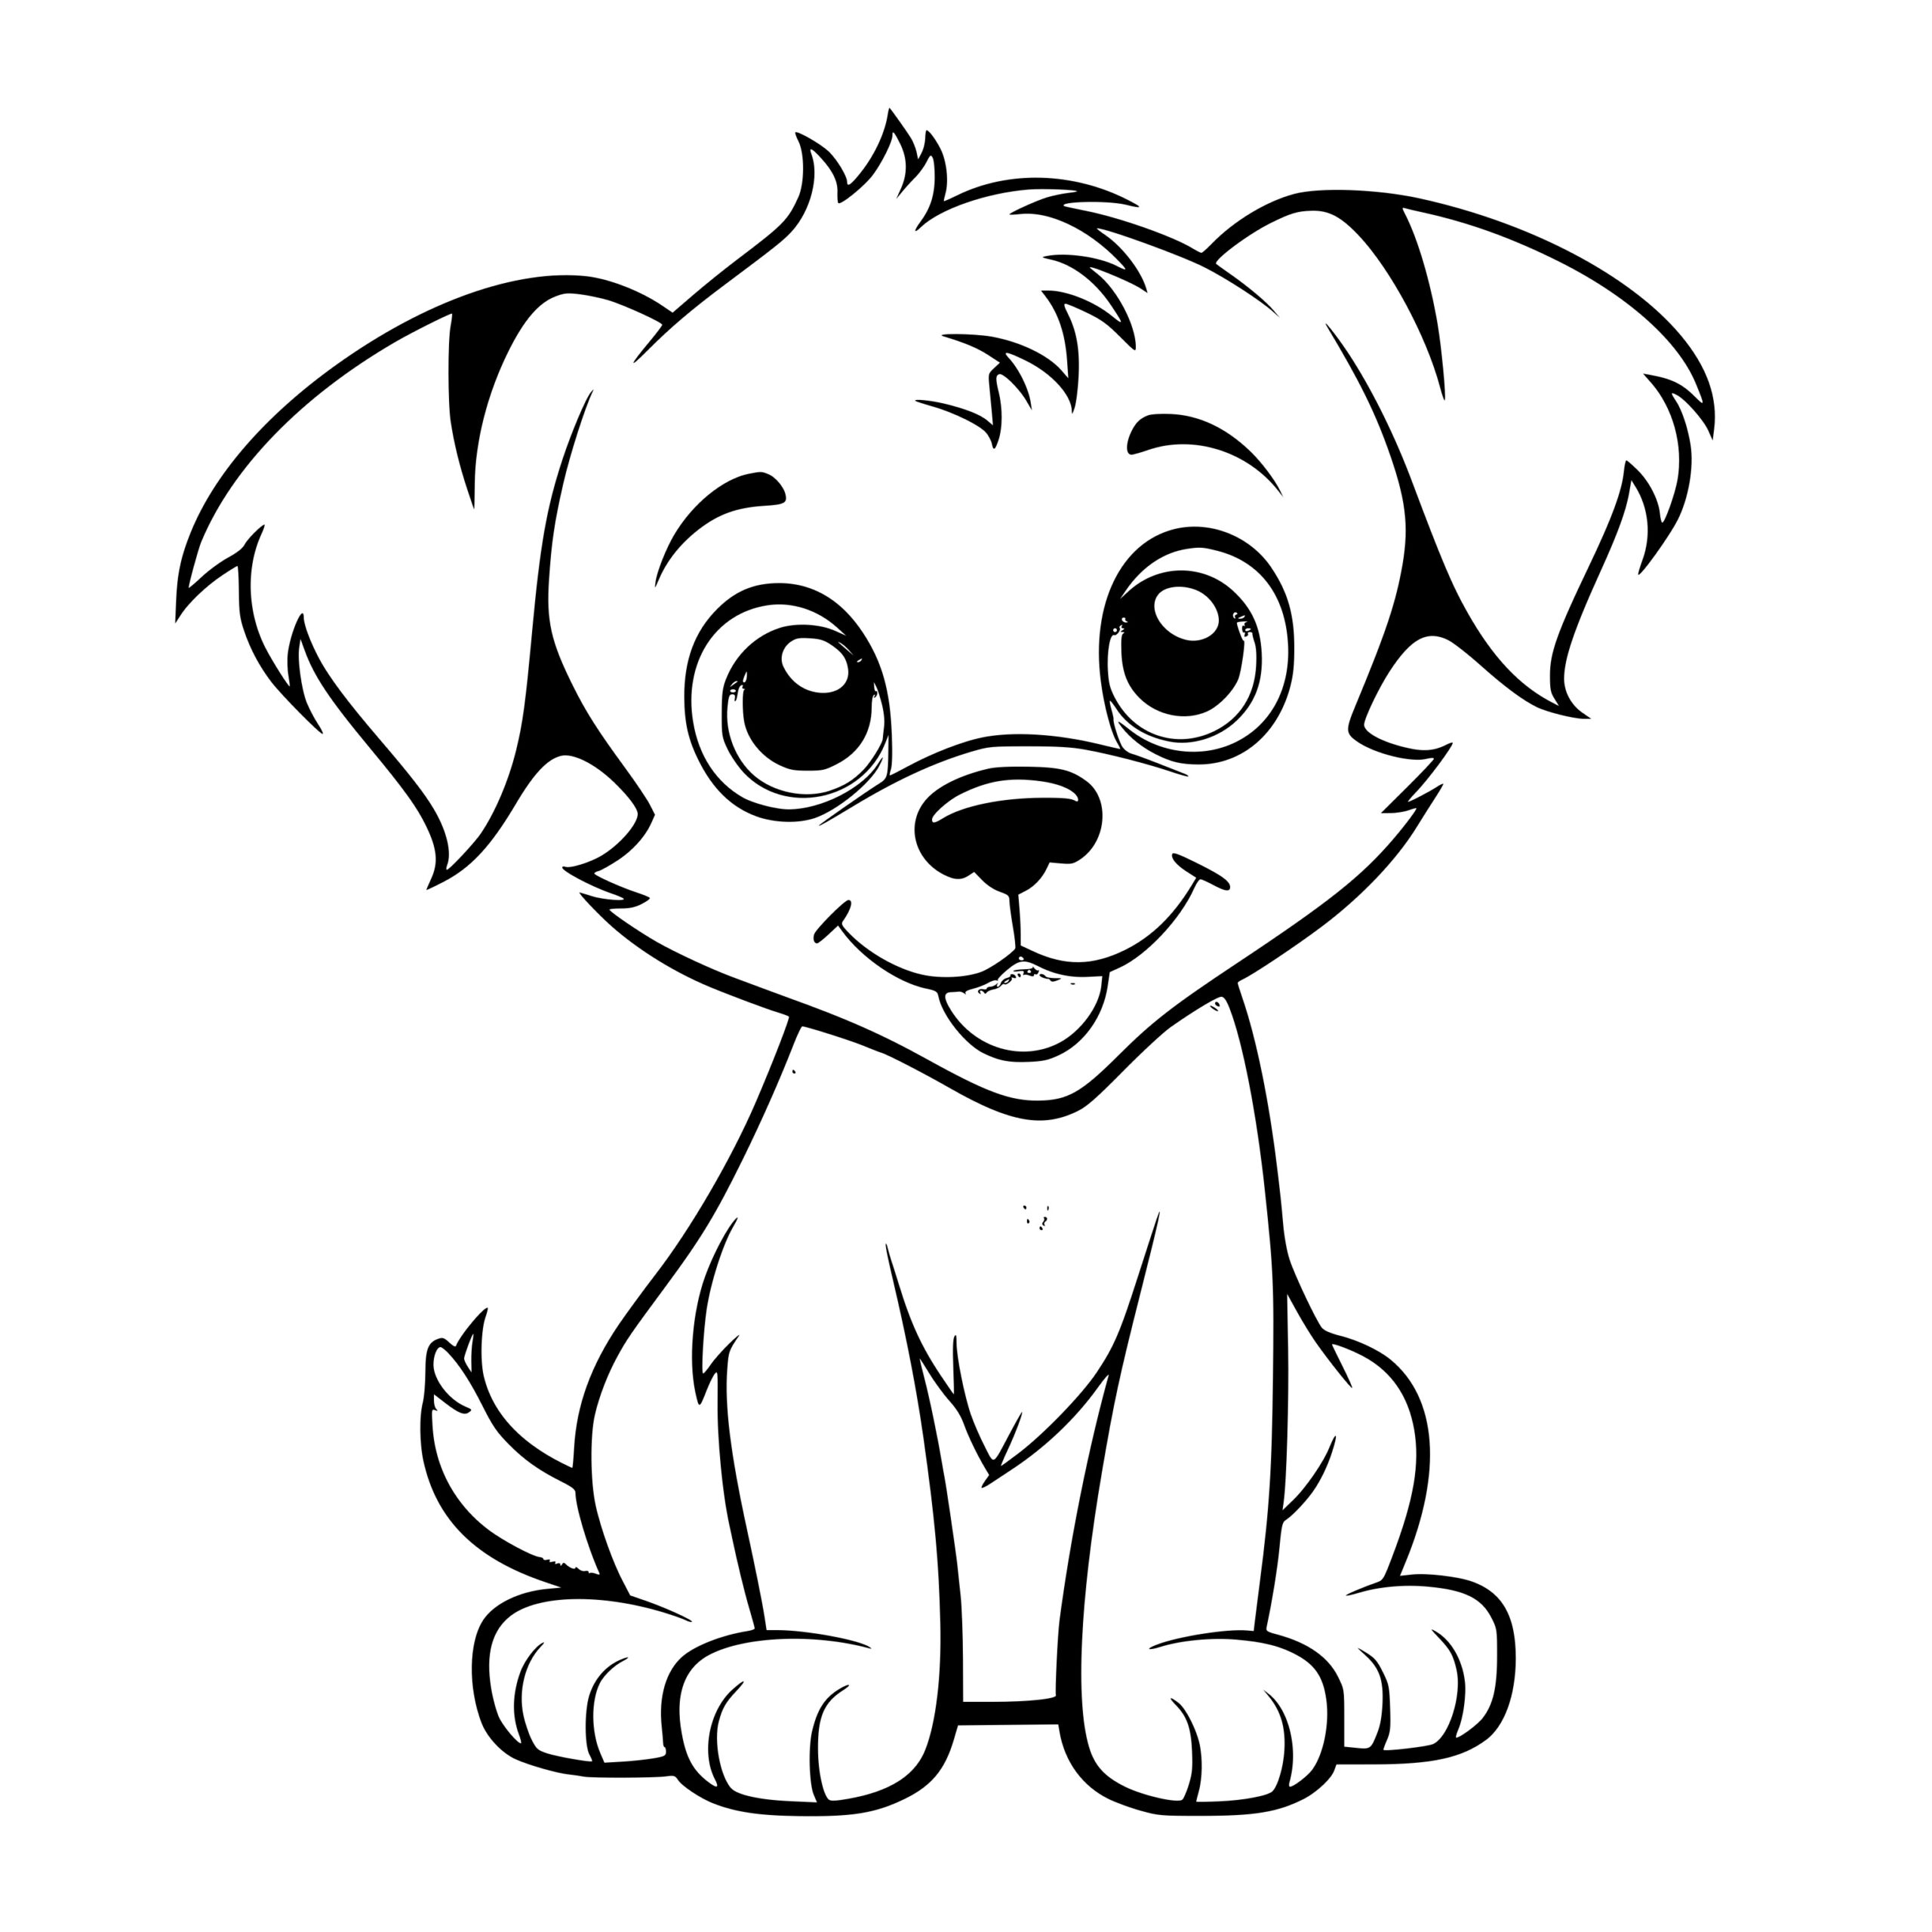 Smiling Pup SVG File: Instant Download for Cricut, Silhouette, Laser